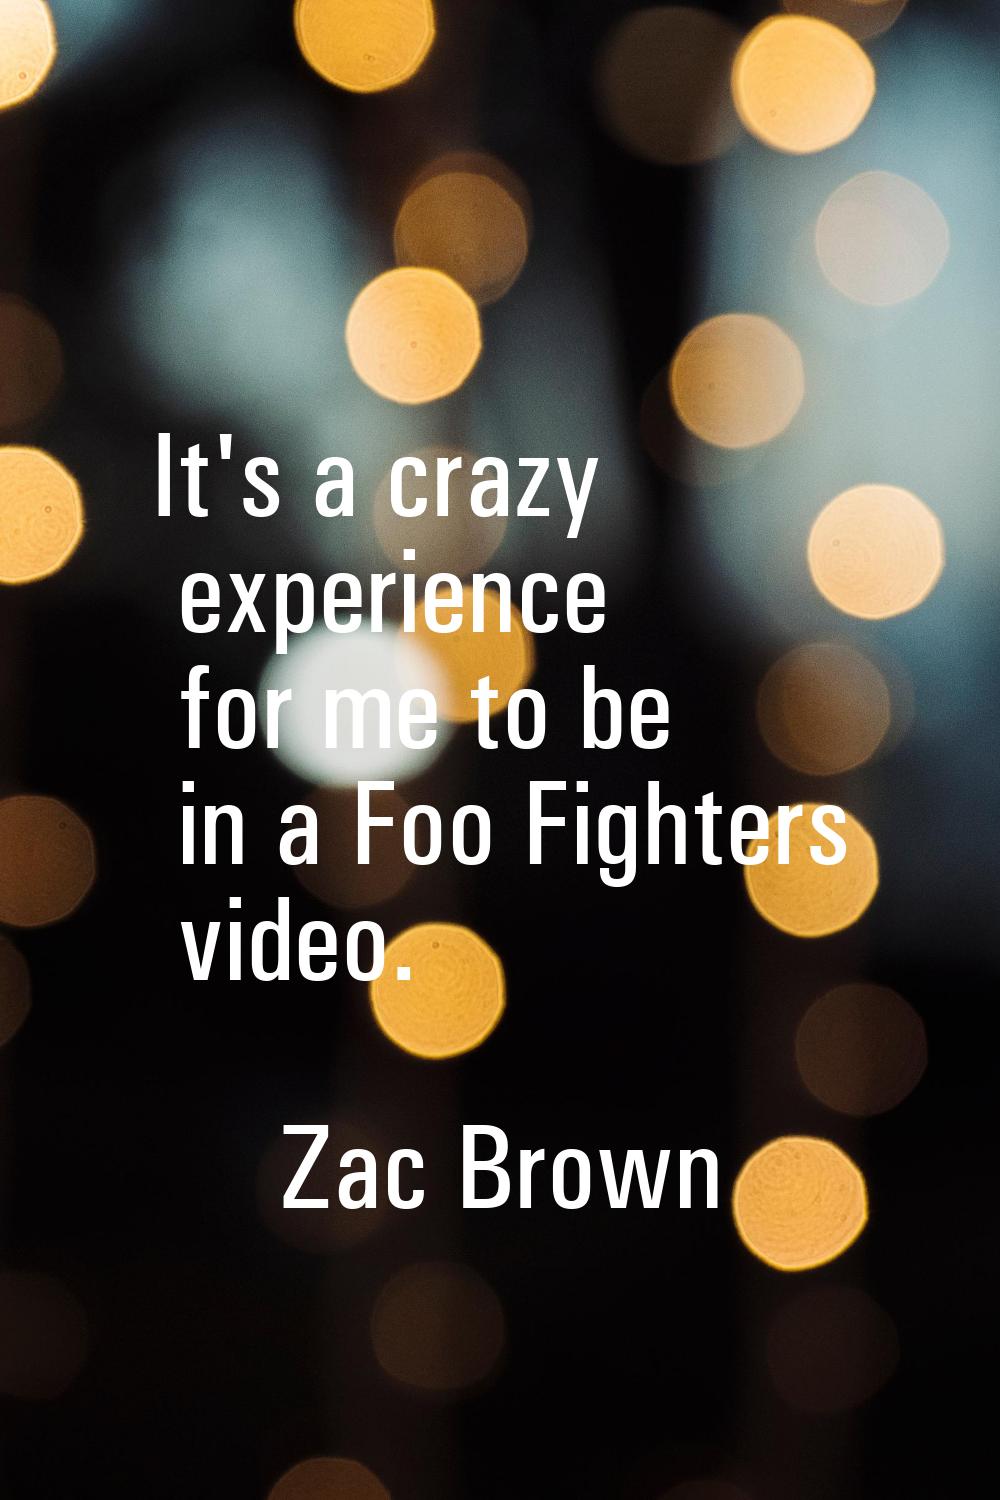 It's a crazy experience for me to be in a Foo Fighters video.